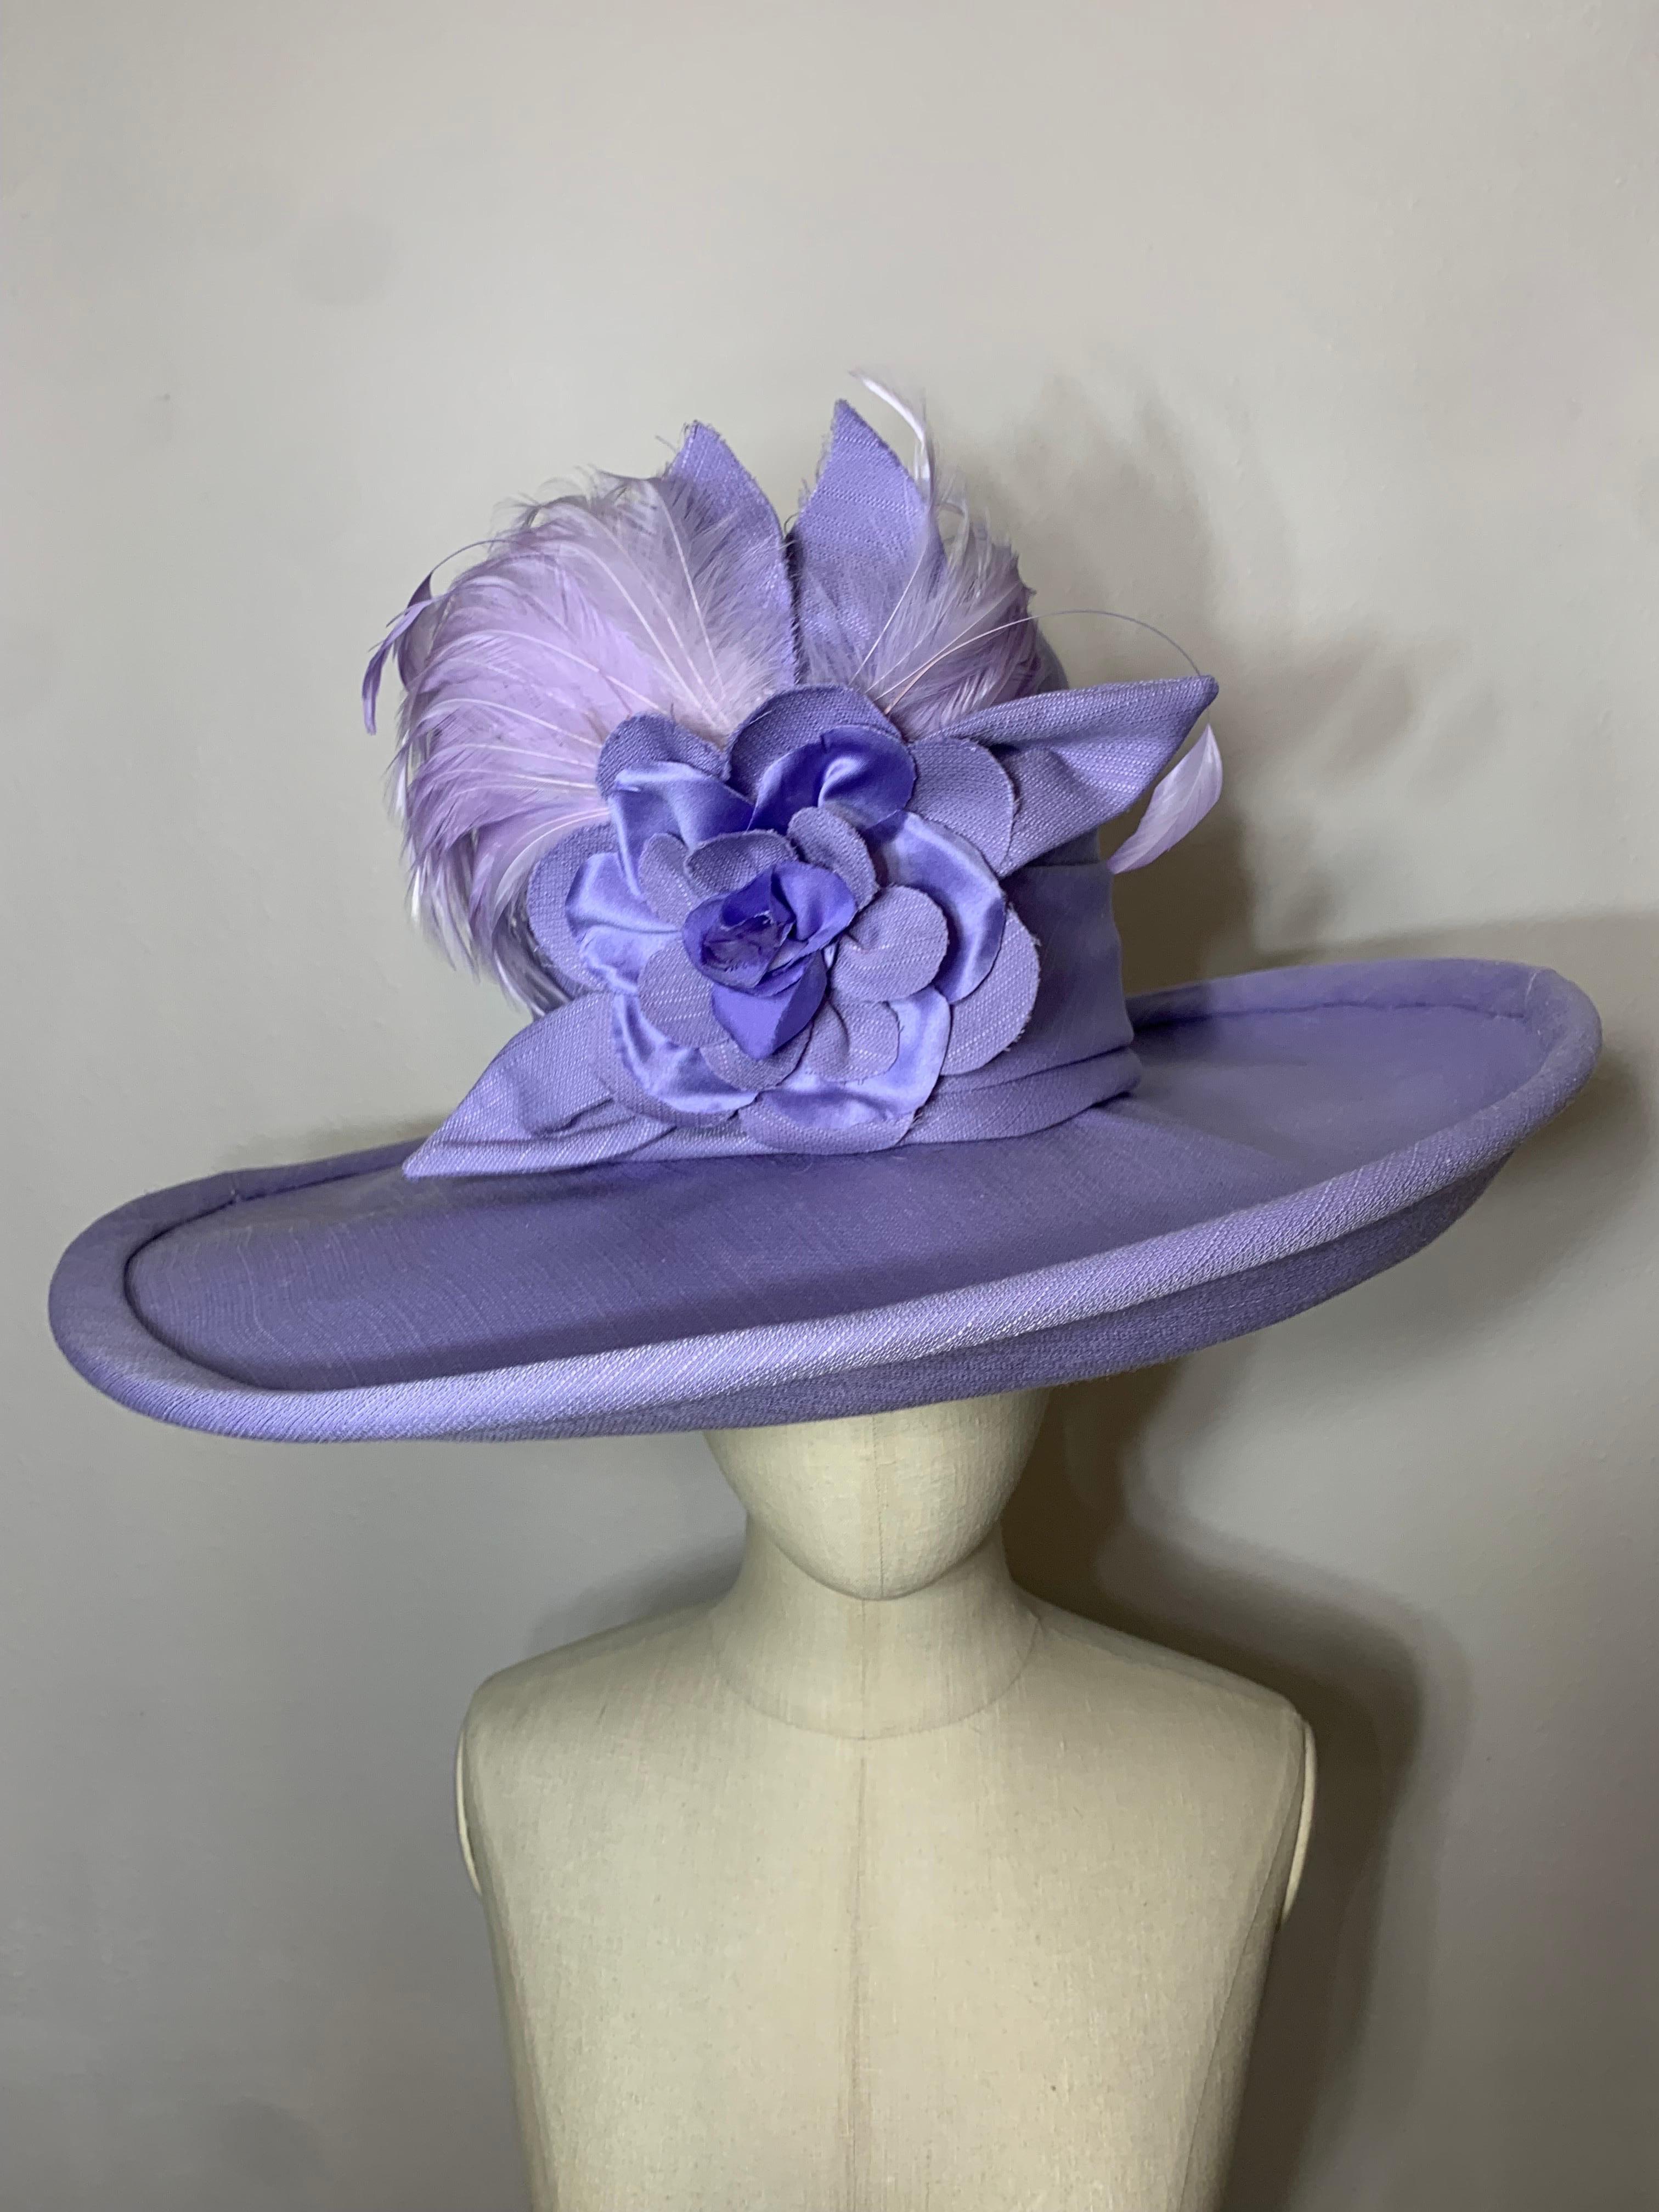 2010 Maison Michel Spring / Summer Lavender Linen Wide Brim Hat w Feather & Floral Bouquet: Tall body hat is made from Christian Dior couture fabric (made to order with a matching Dior ensemble) with pleated contrasting hat band, dyed to match coq